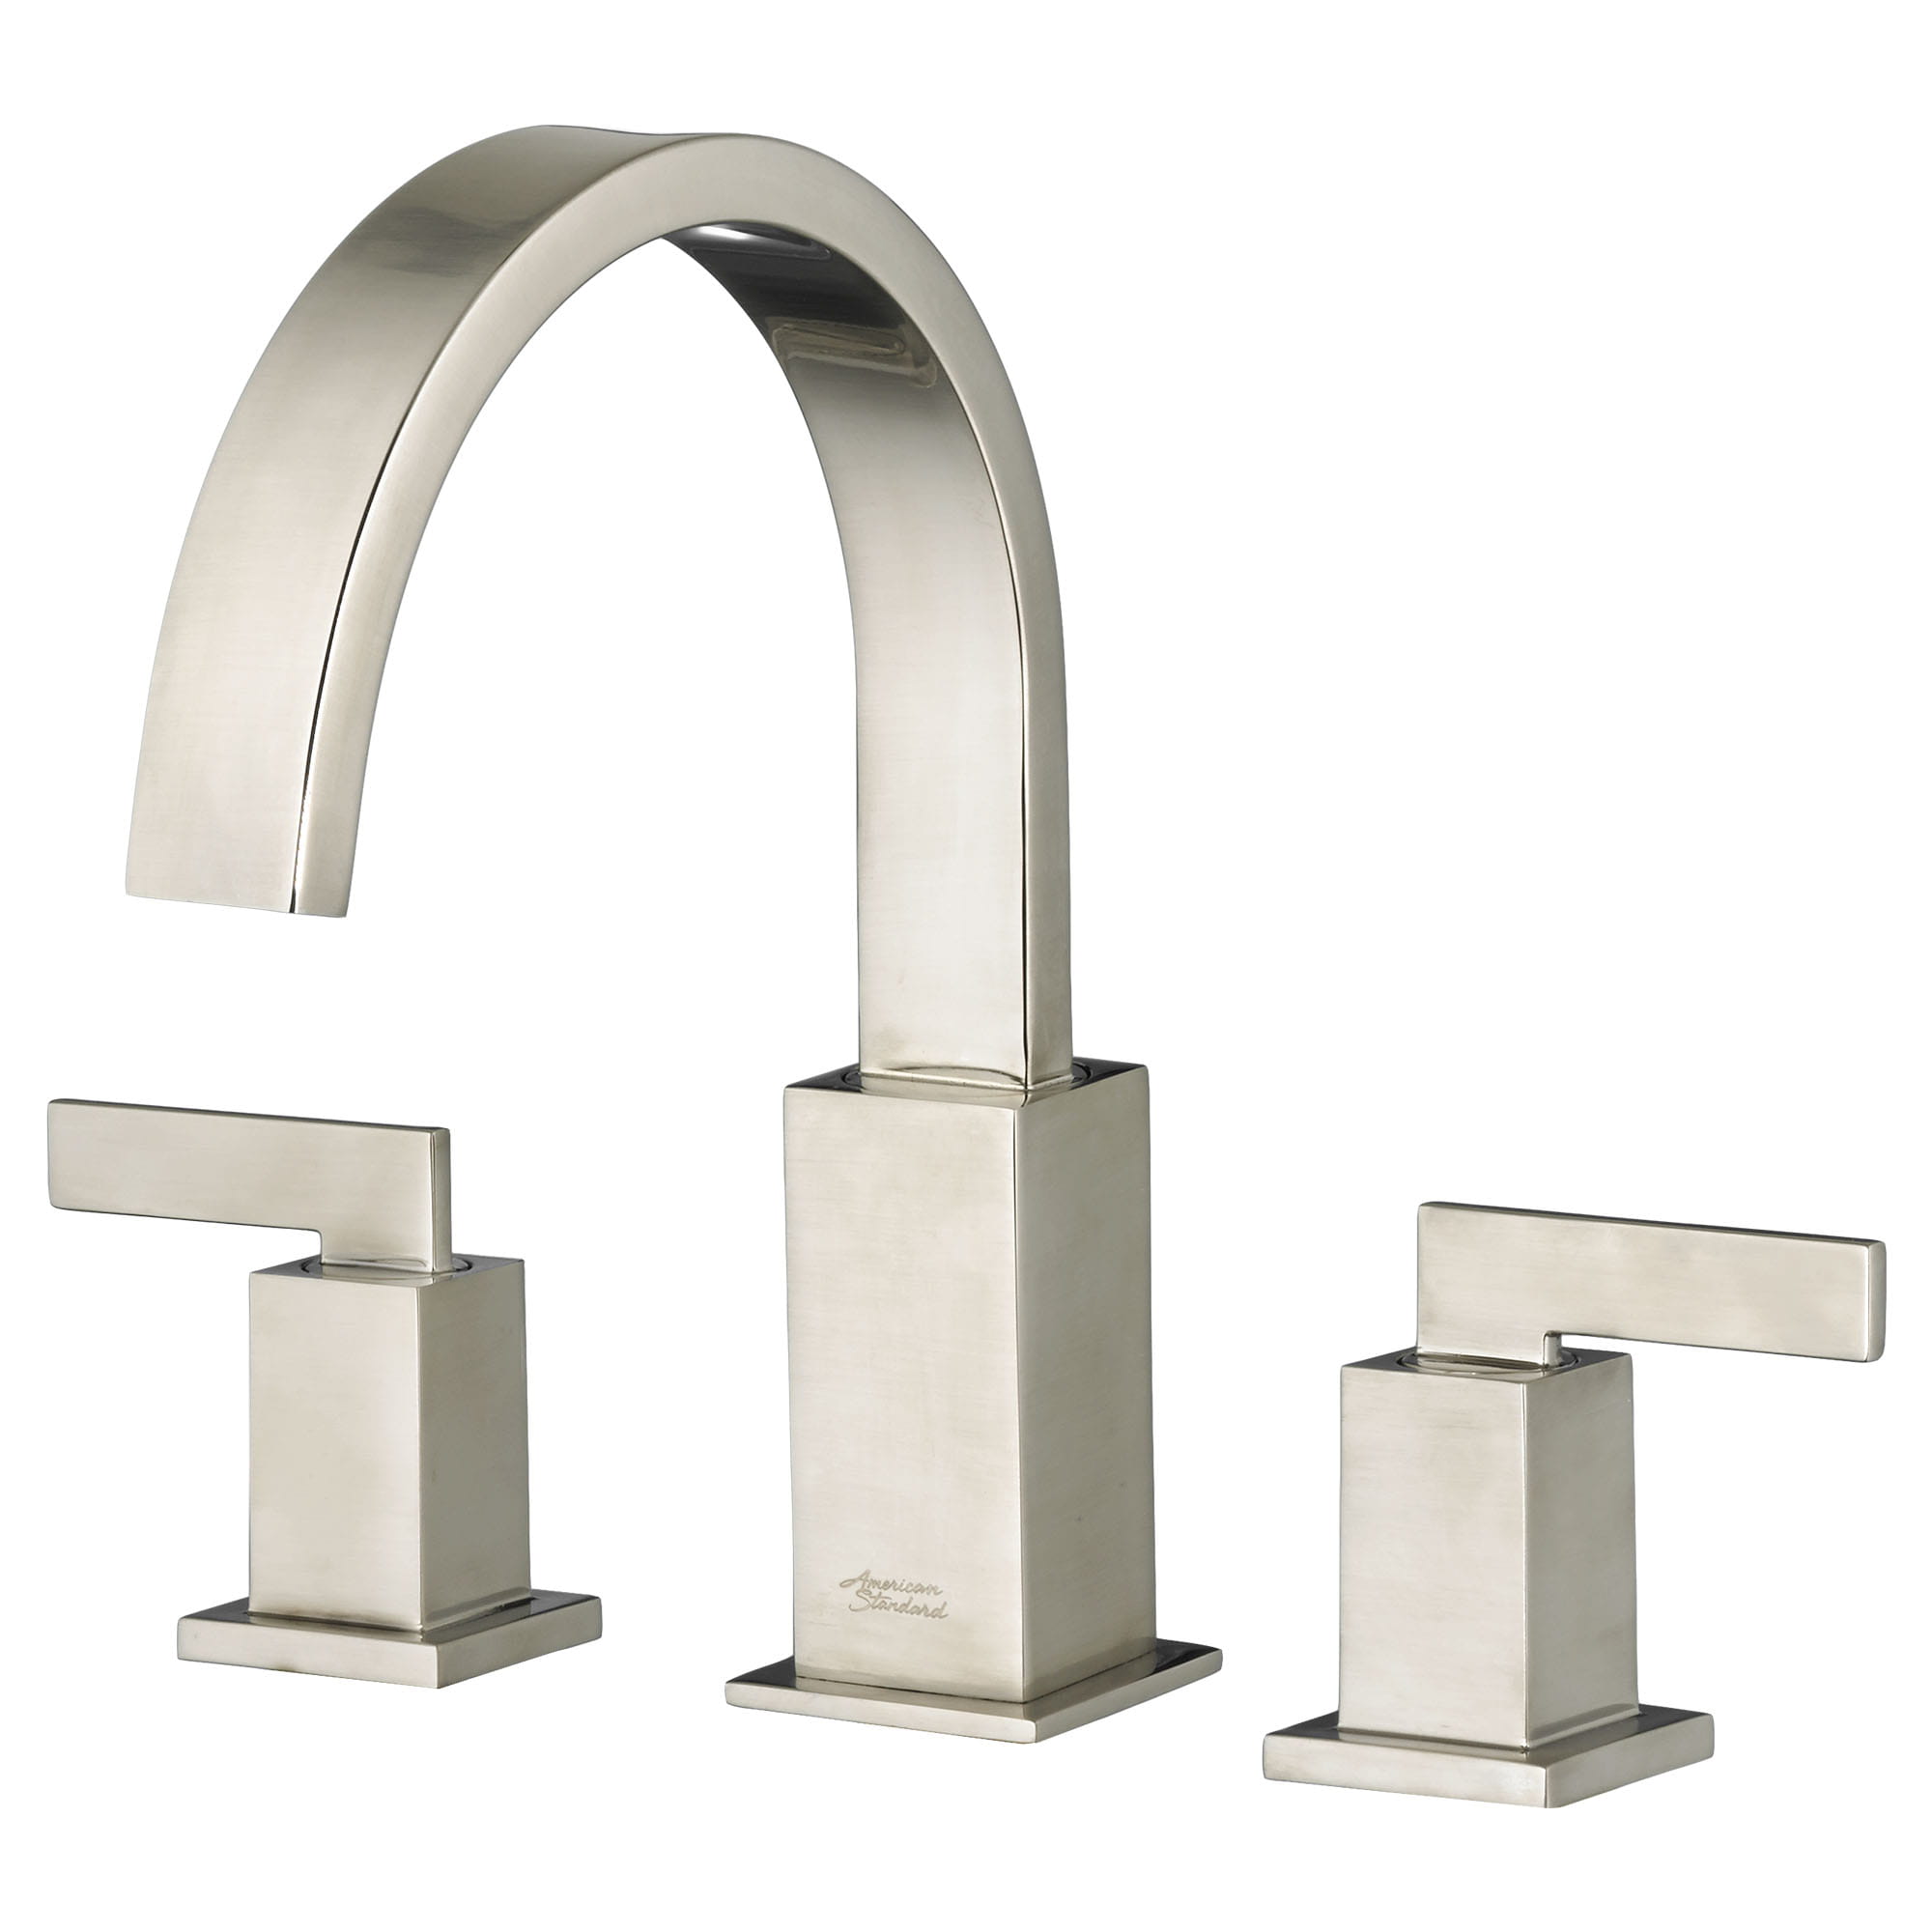 Time Square Bathtub Faucet With Lever Handles for Flash Rough In Valve   BRUSHED NICKEL